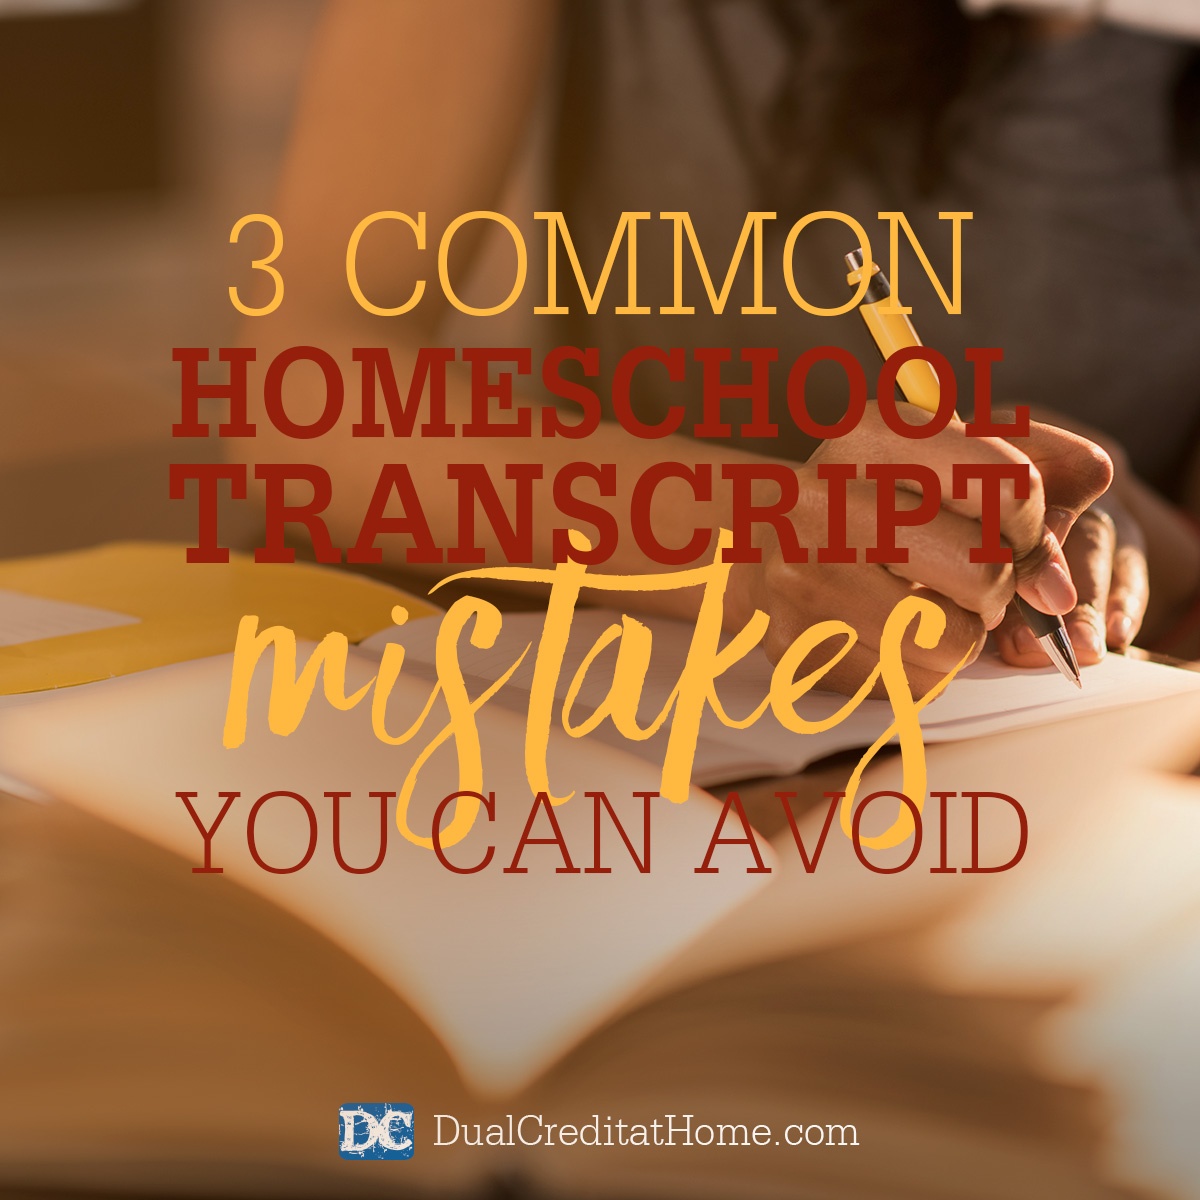 3 Common Homeschool Transcript Mistakes You Can Avoid